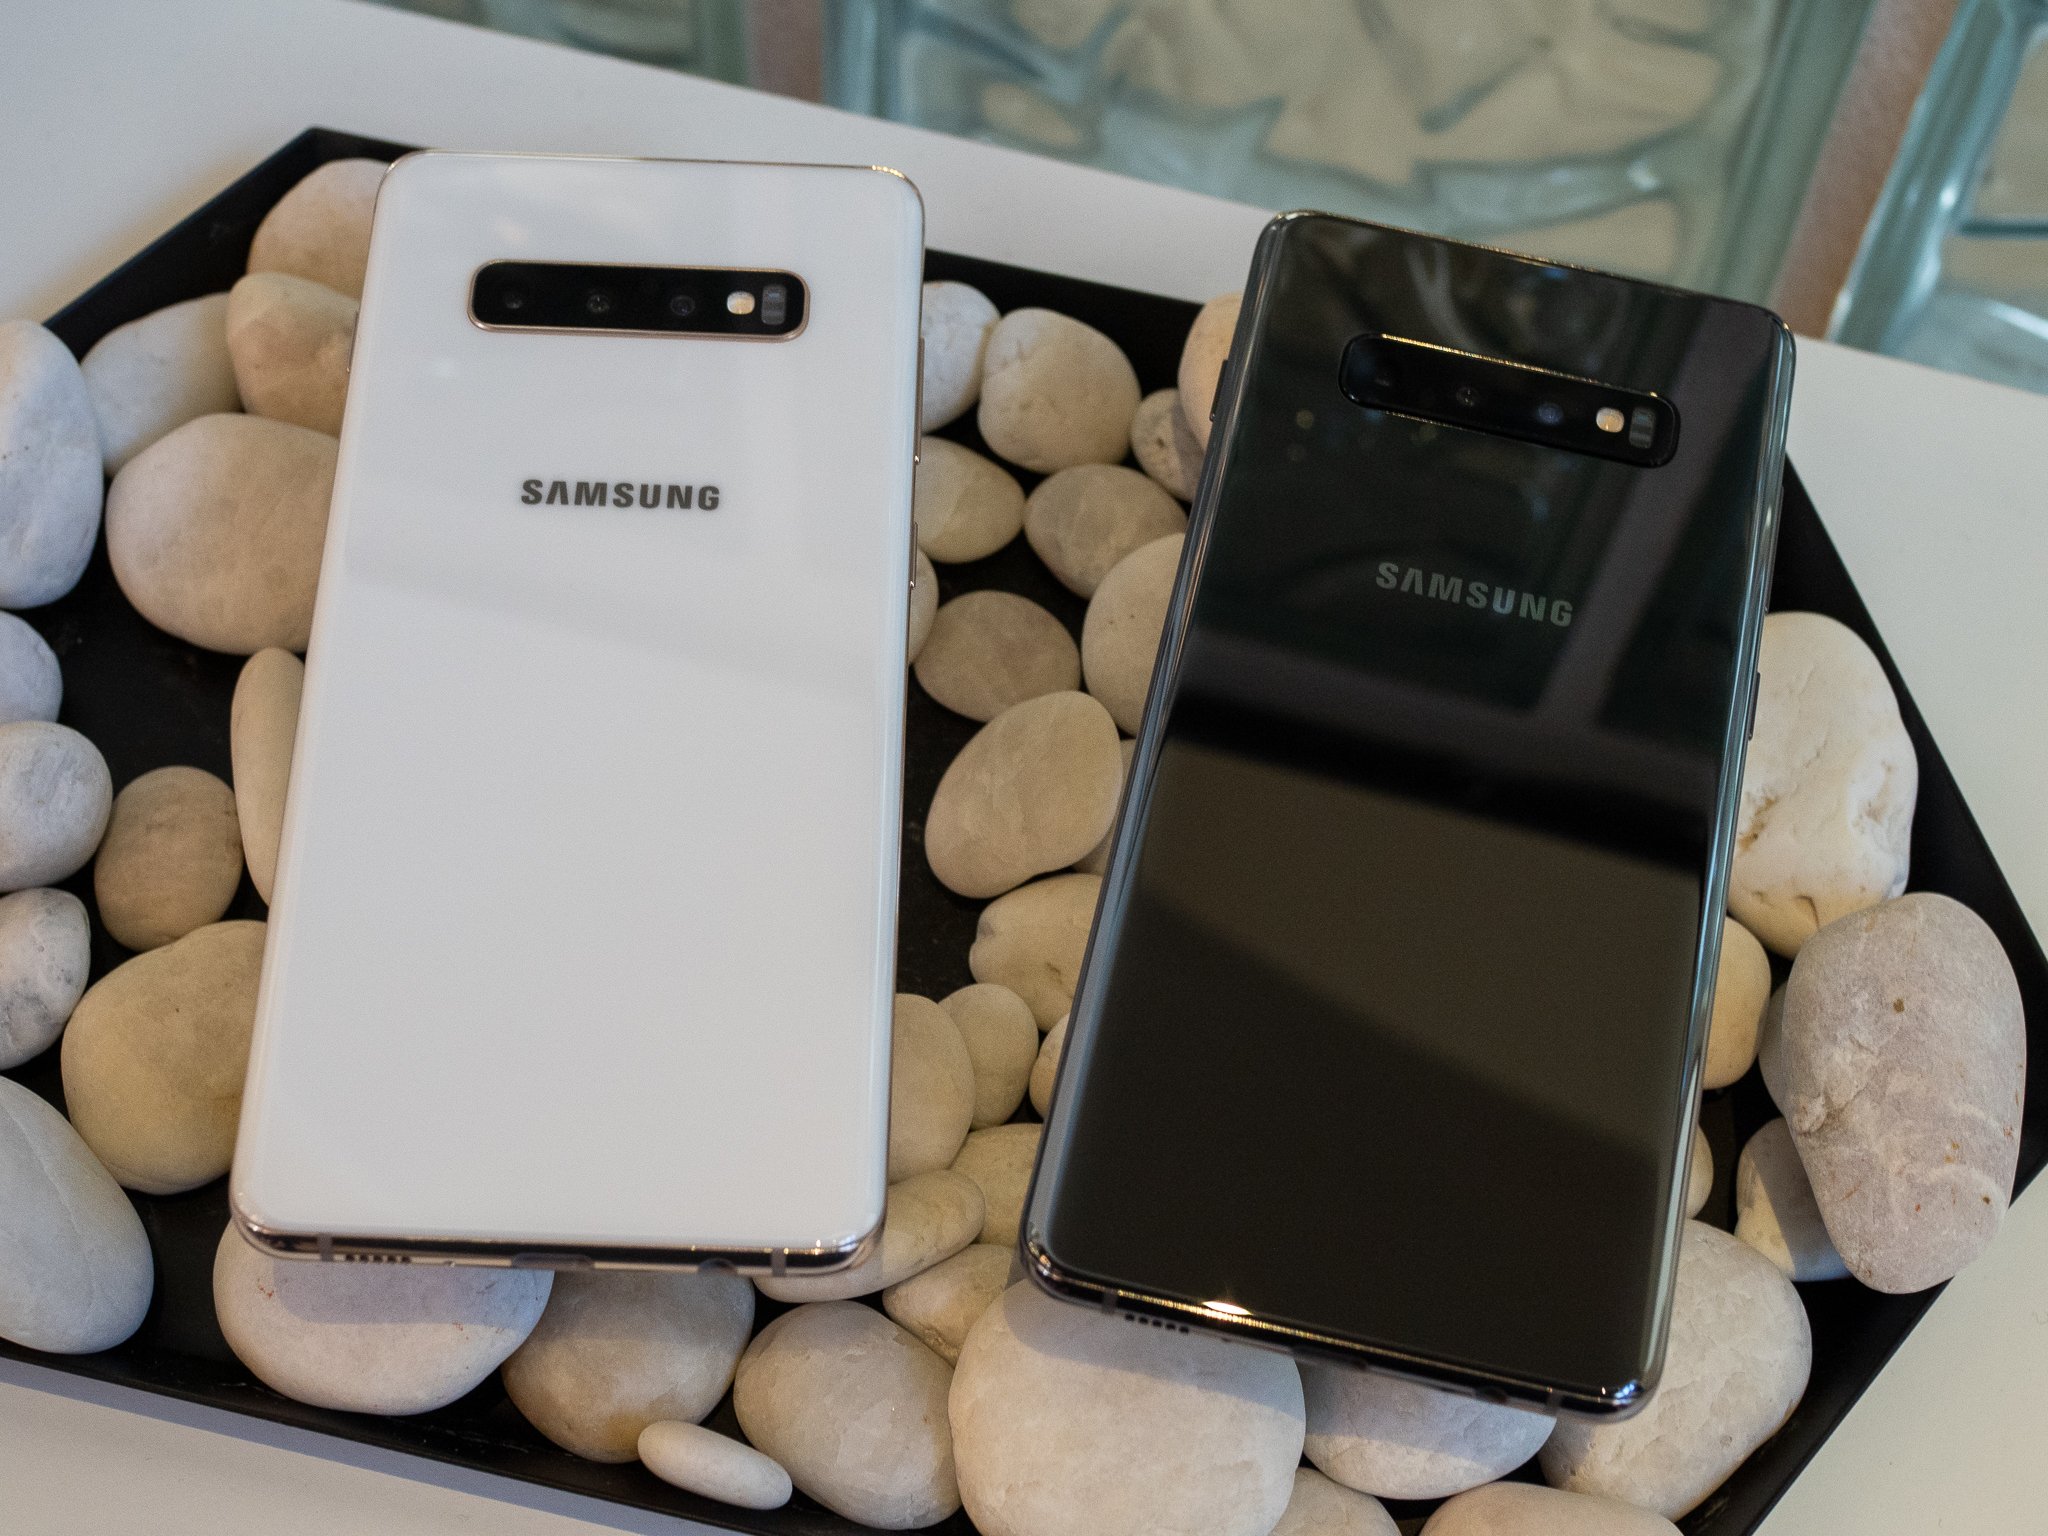 Samsung Galaxy S10 Should I Buy The Glass Or Ceramic Version